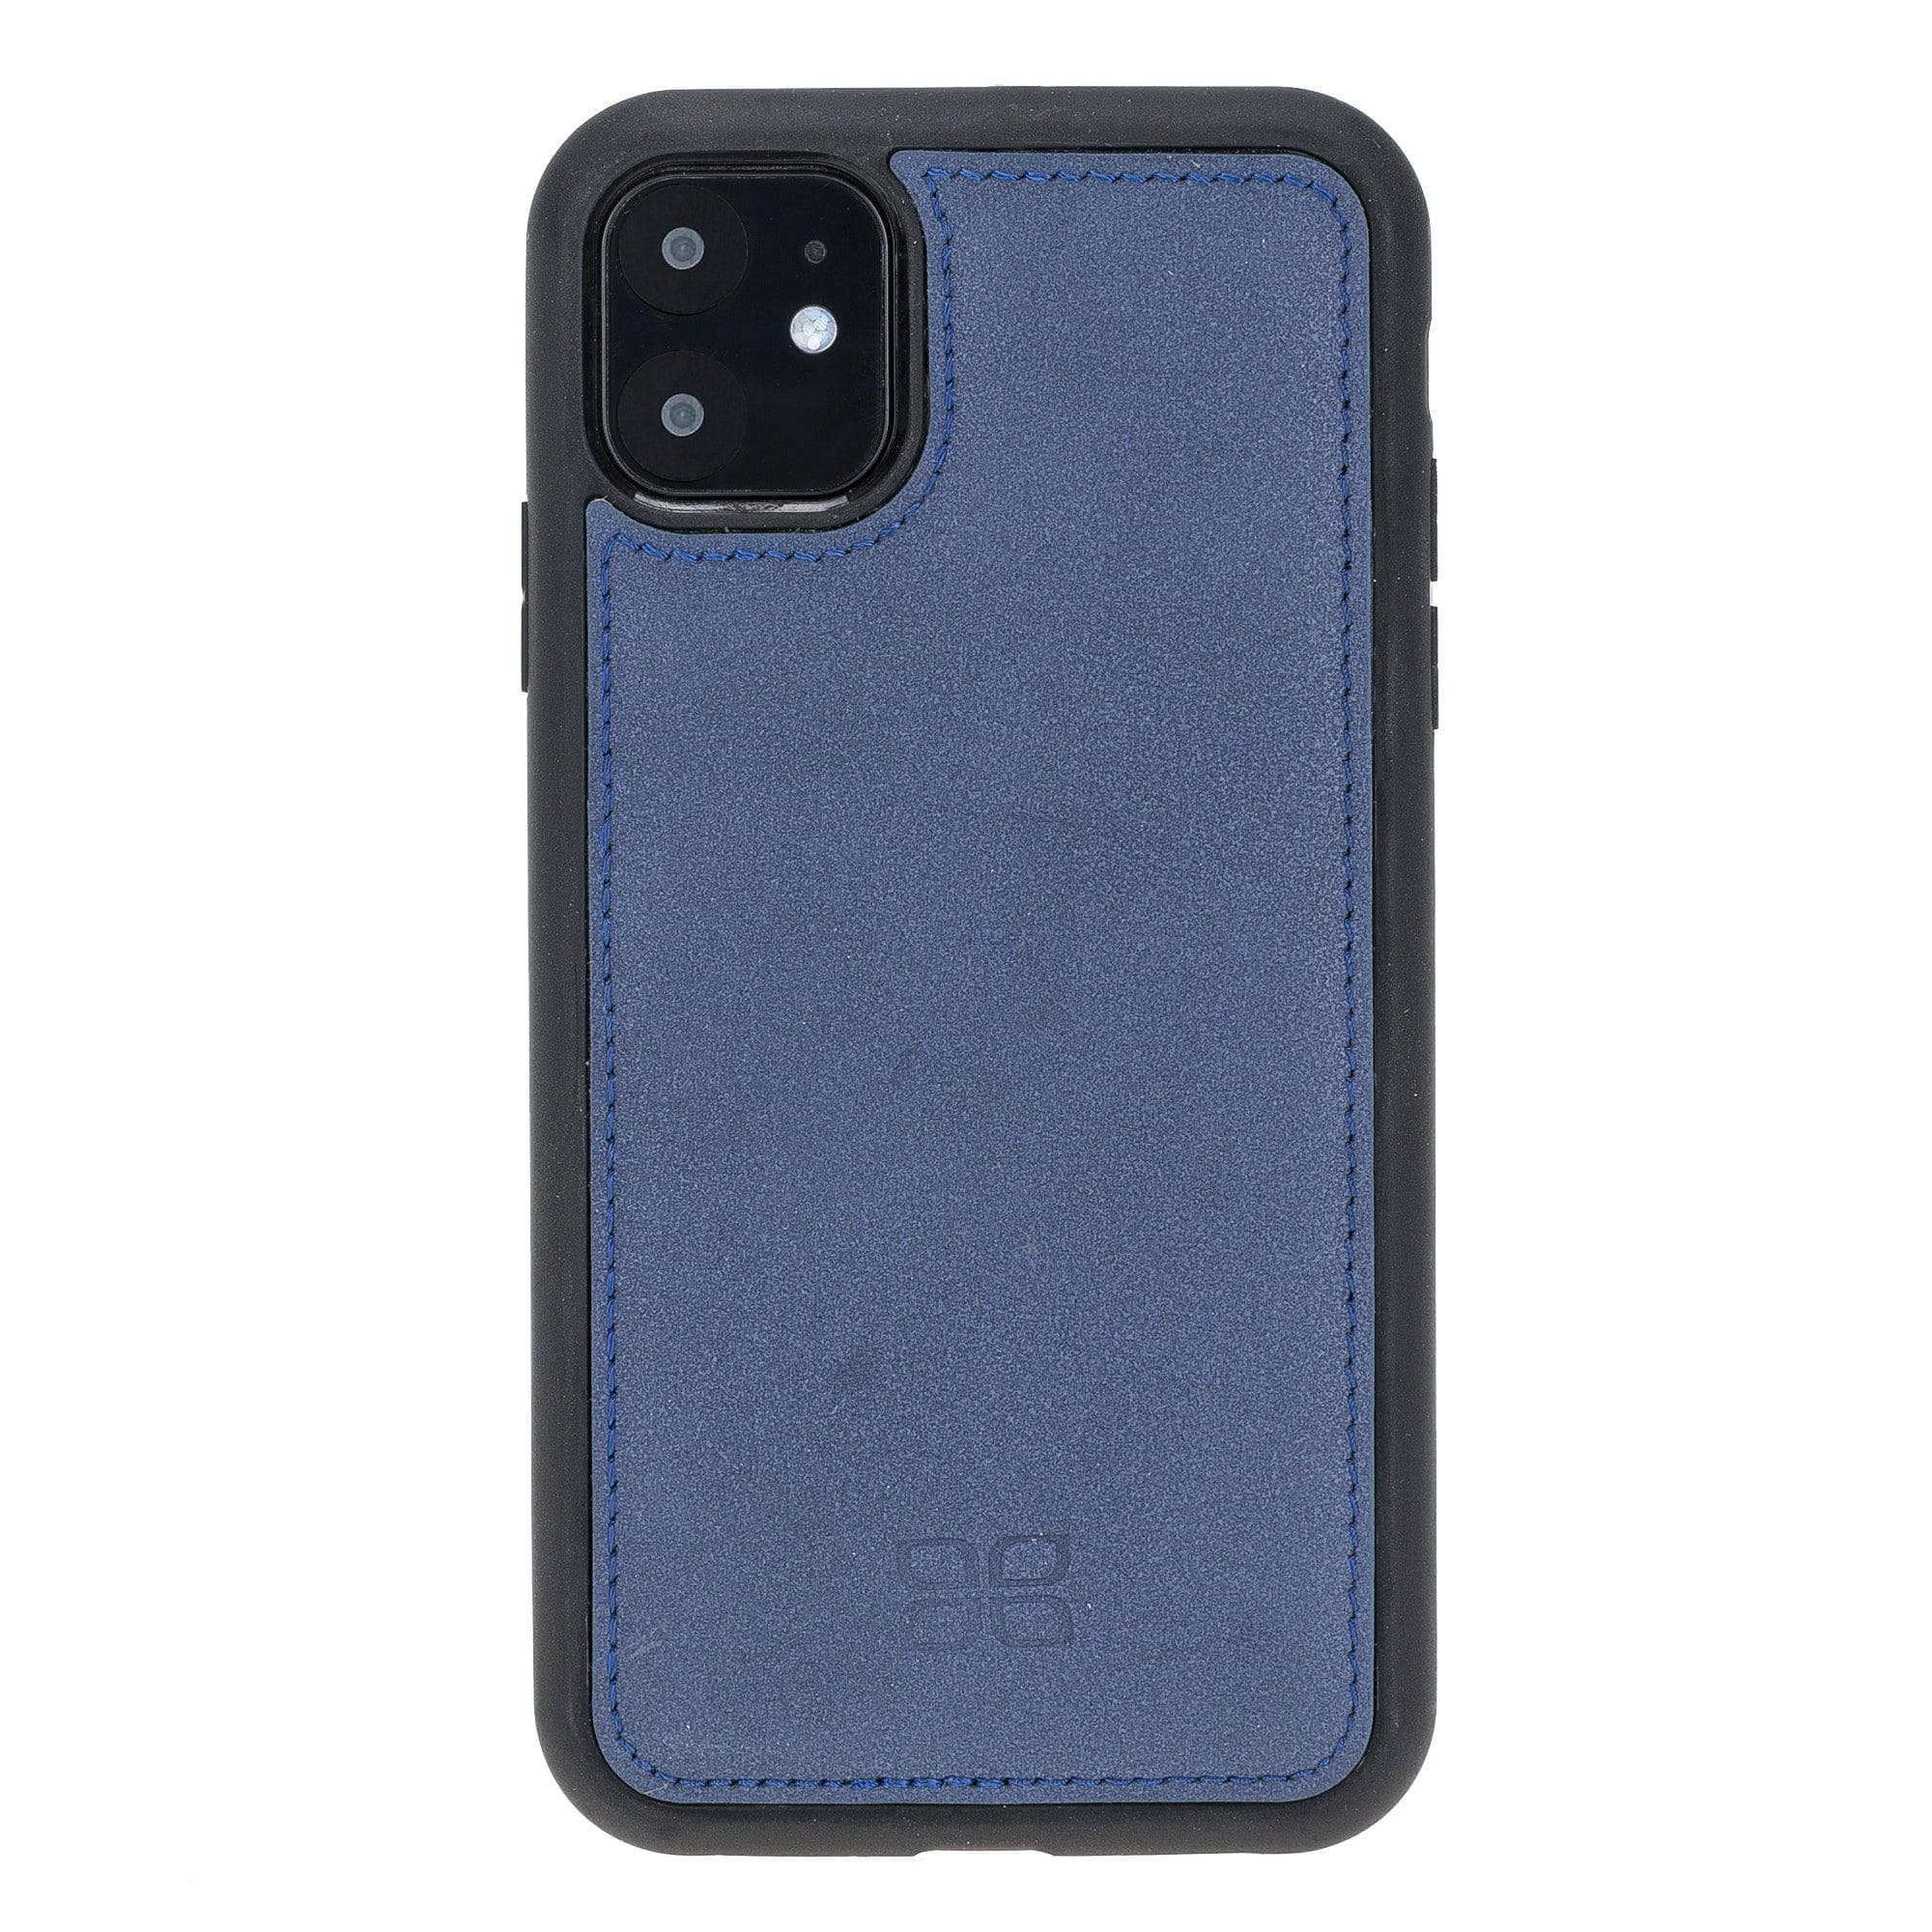 Flex Cover Leather Back Cover Case for Apple iPhone 11 Series iPhone 11 6.1" / Navy Blue Bouletta LTD